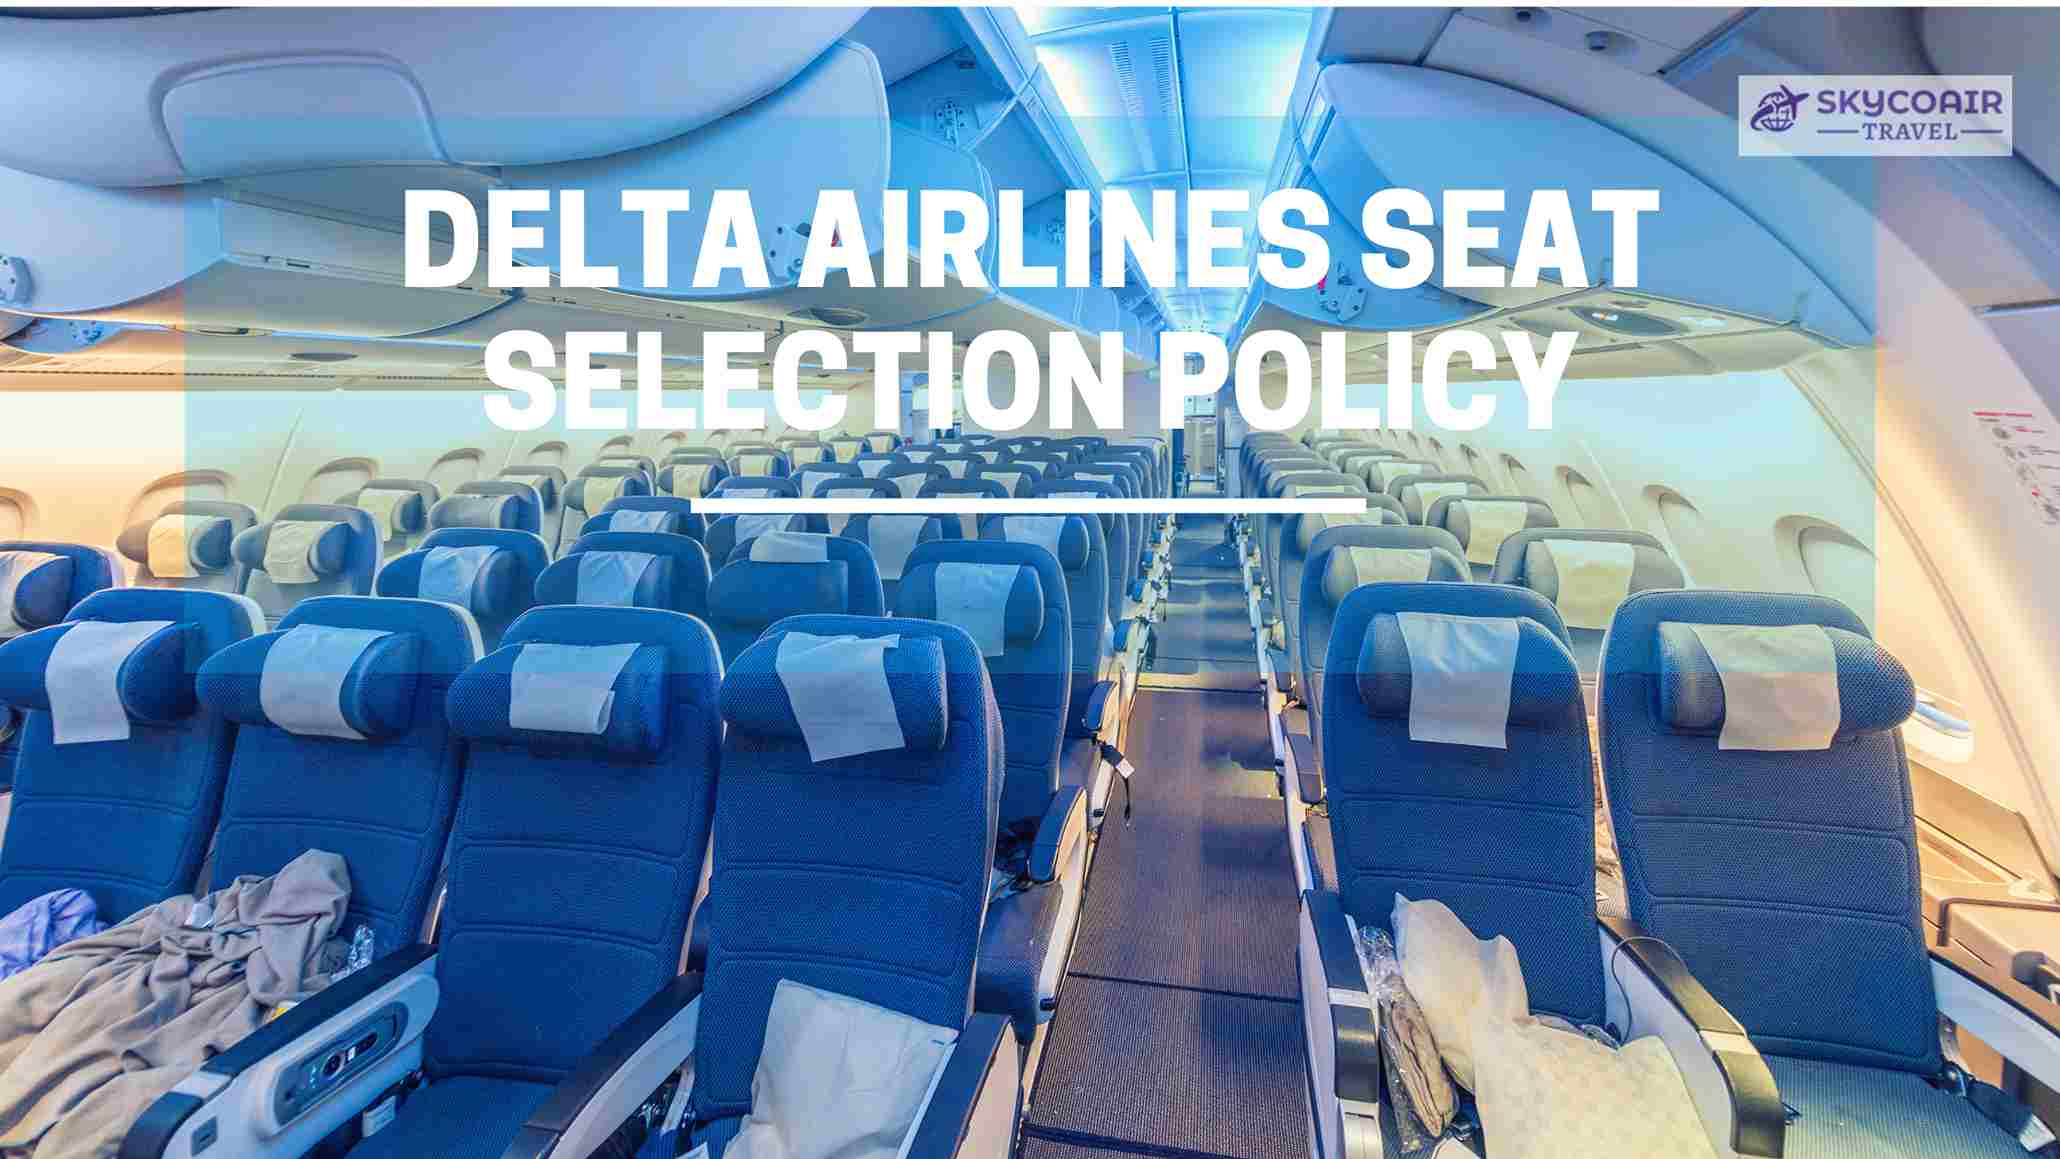 DELTA AIRLINES SEAT SELECTION